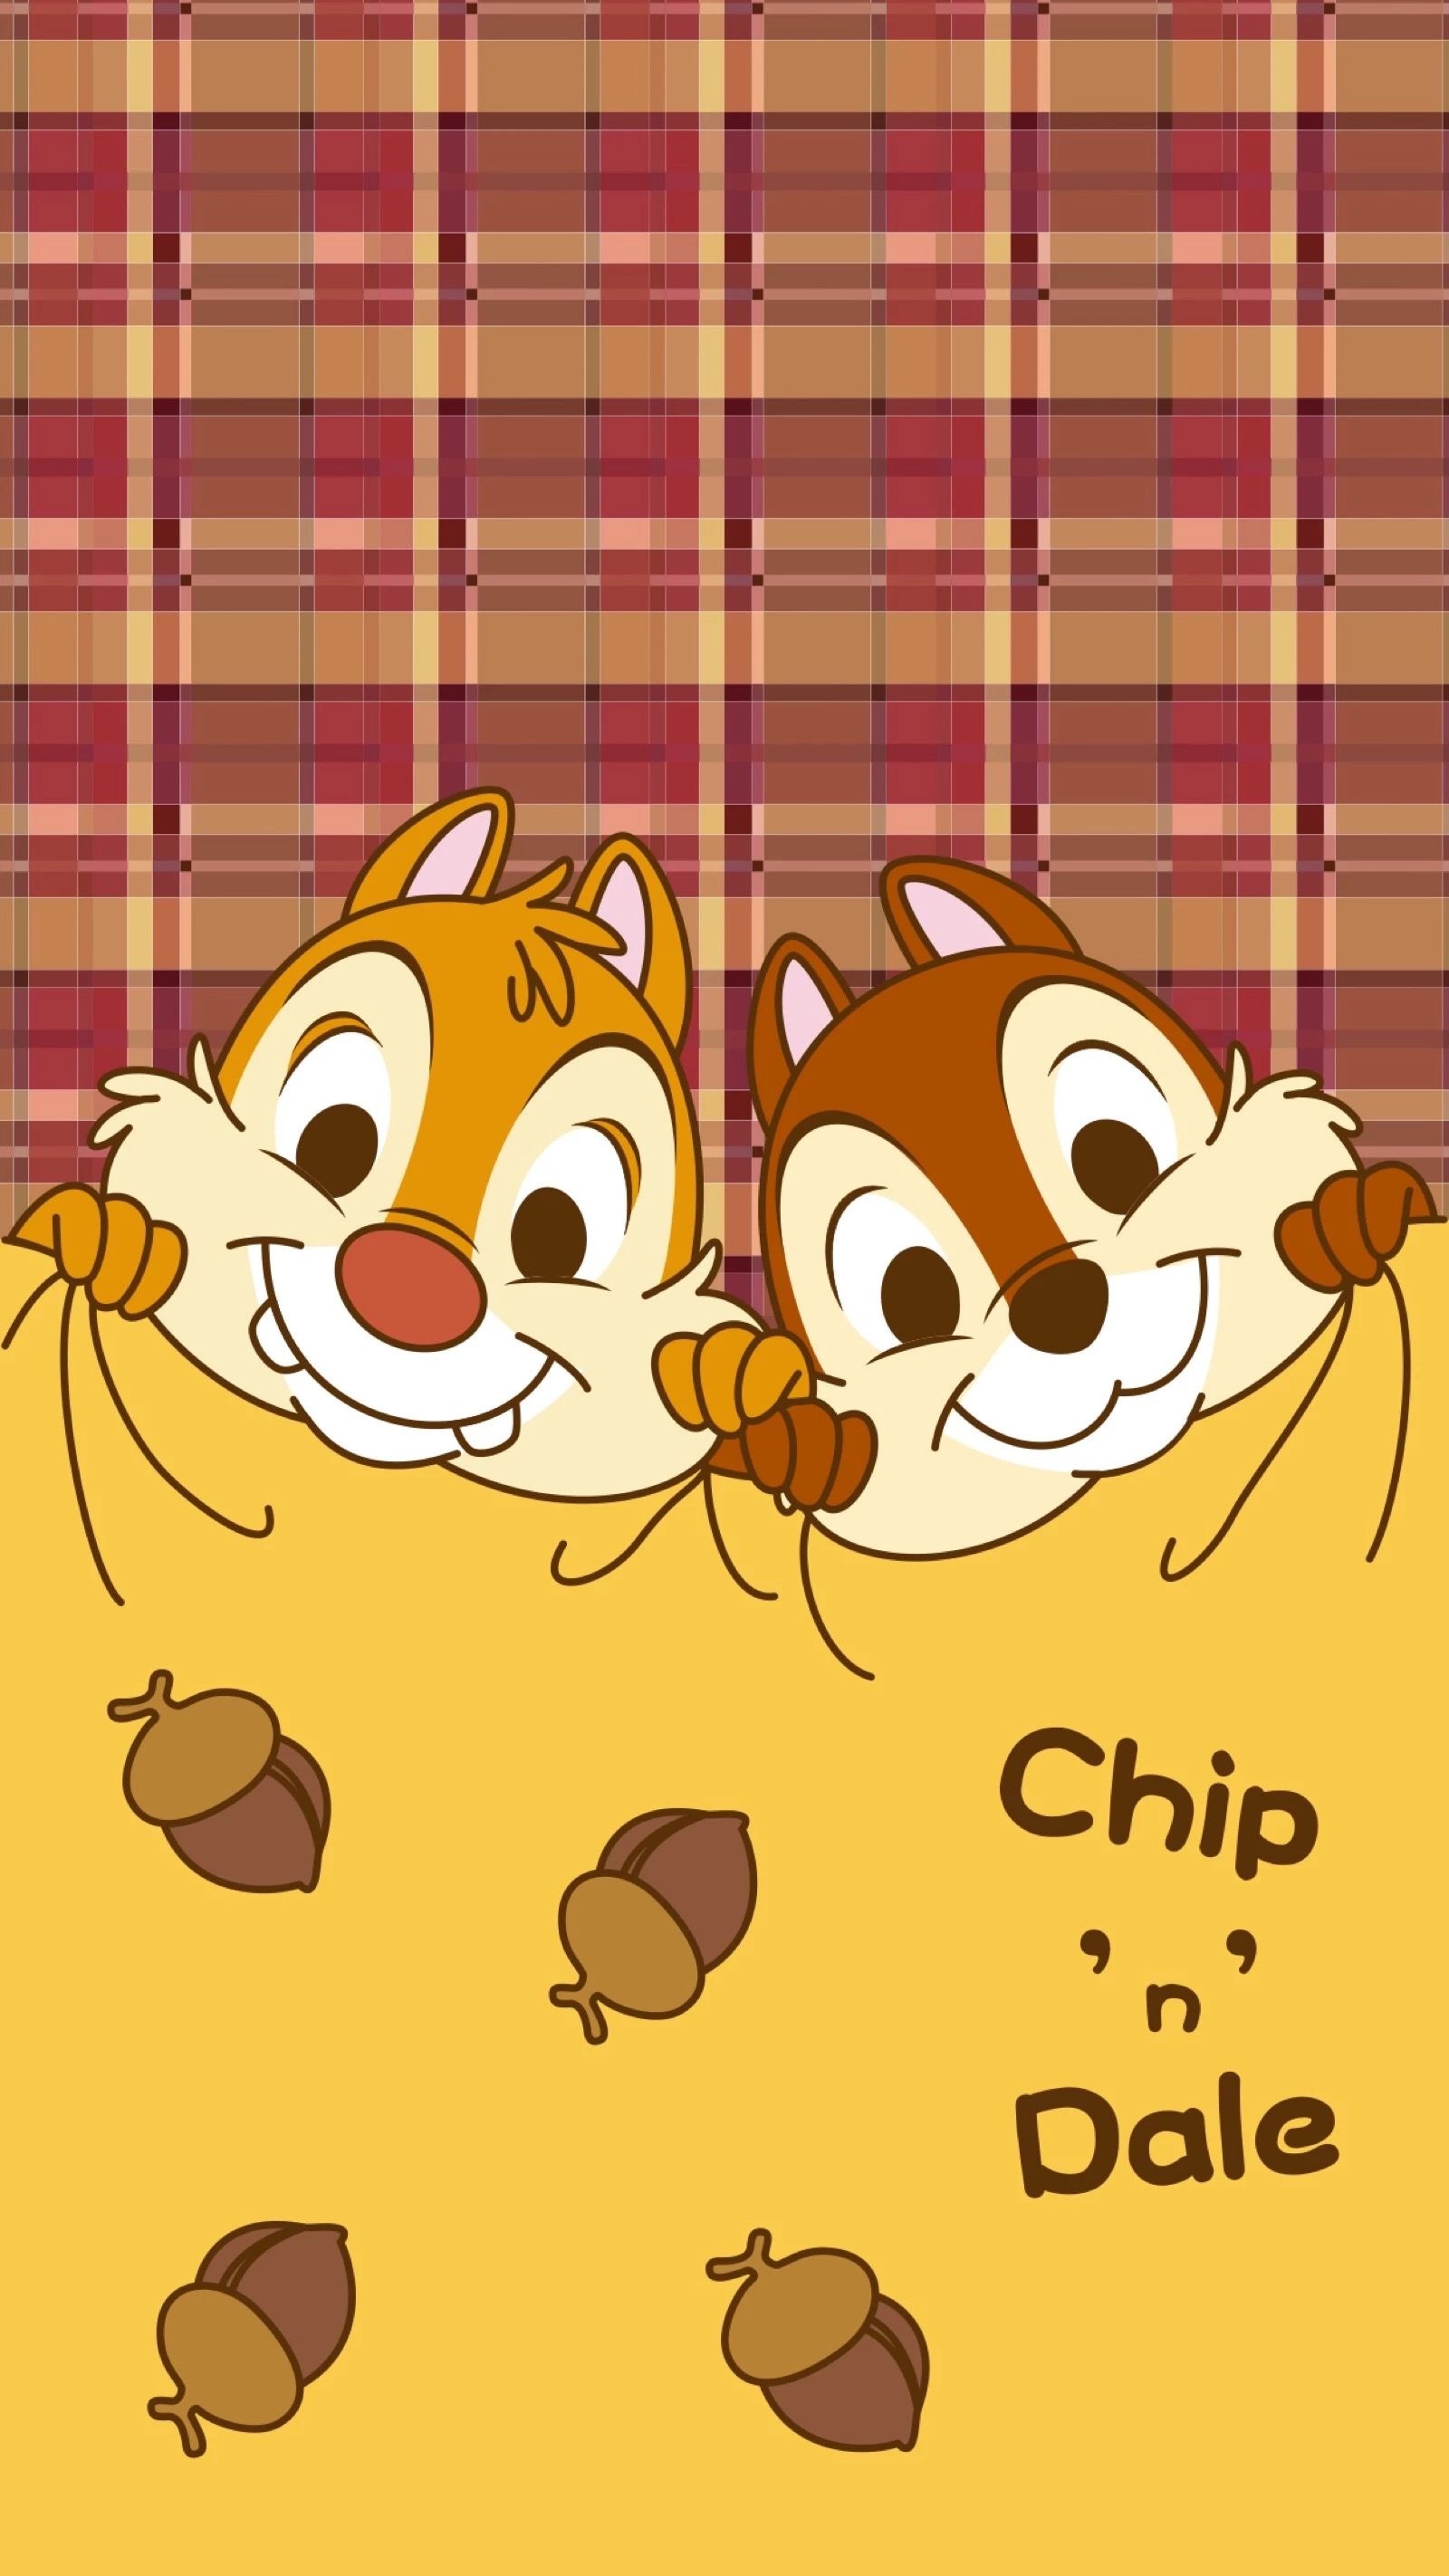 Chip 'n' Dale: Rescue Rangers, Playful wallpapers, Cartoonish charm, Disney animated series, 1600x2850 HD Phone